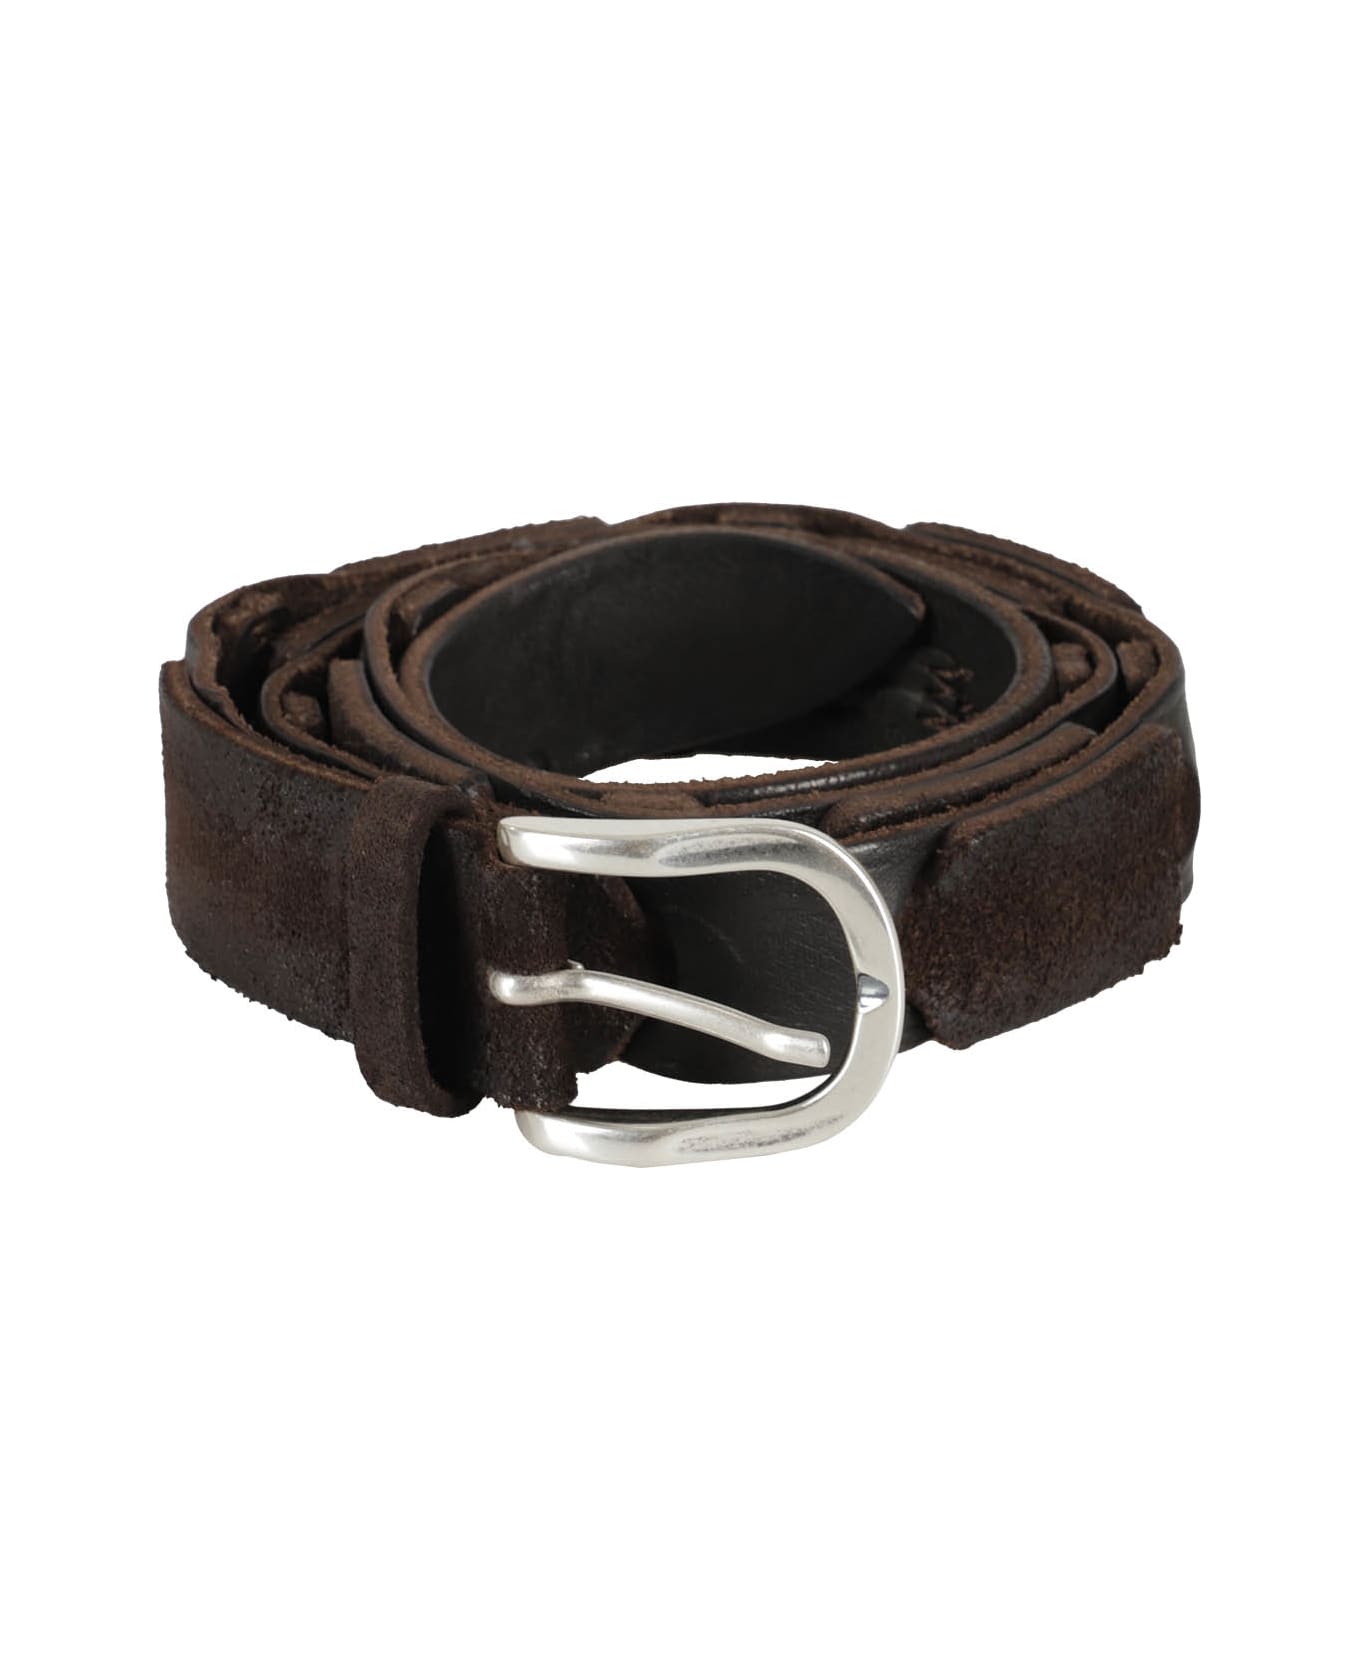 Orciani Leather Belt - T Moro